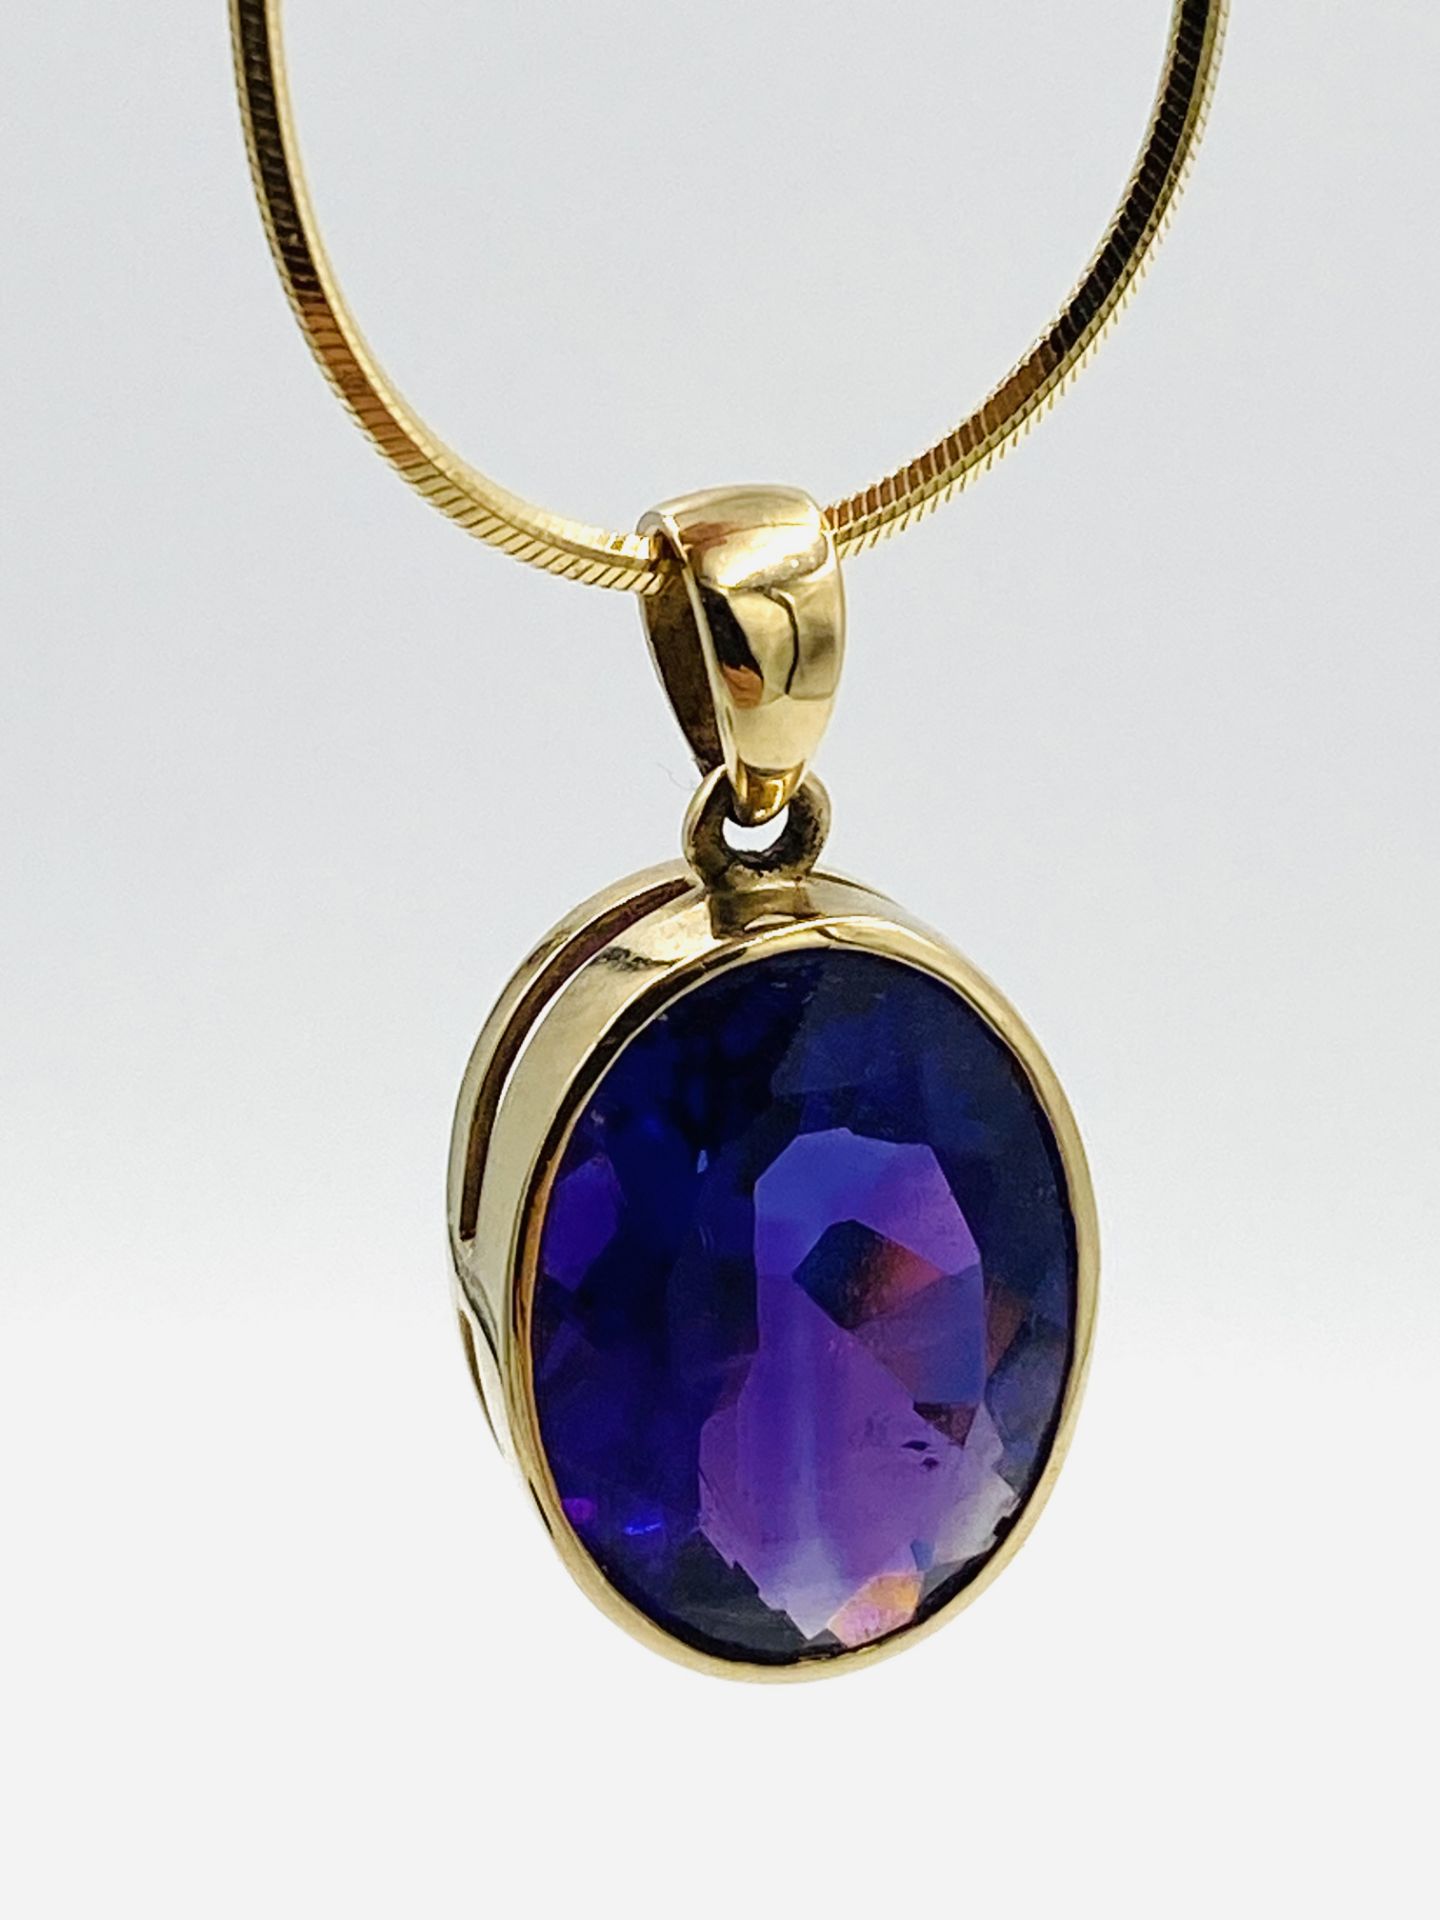 9ct gold and amethyst pendant and chain, a pair of gold, amethyst and diamond earrings - Image 5 of 5